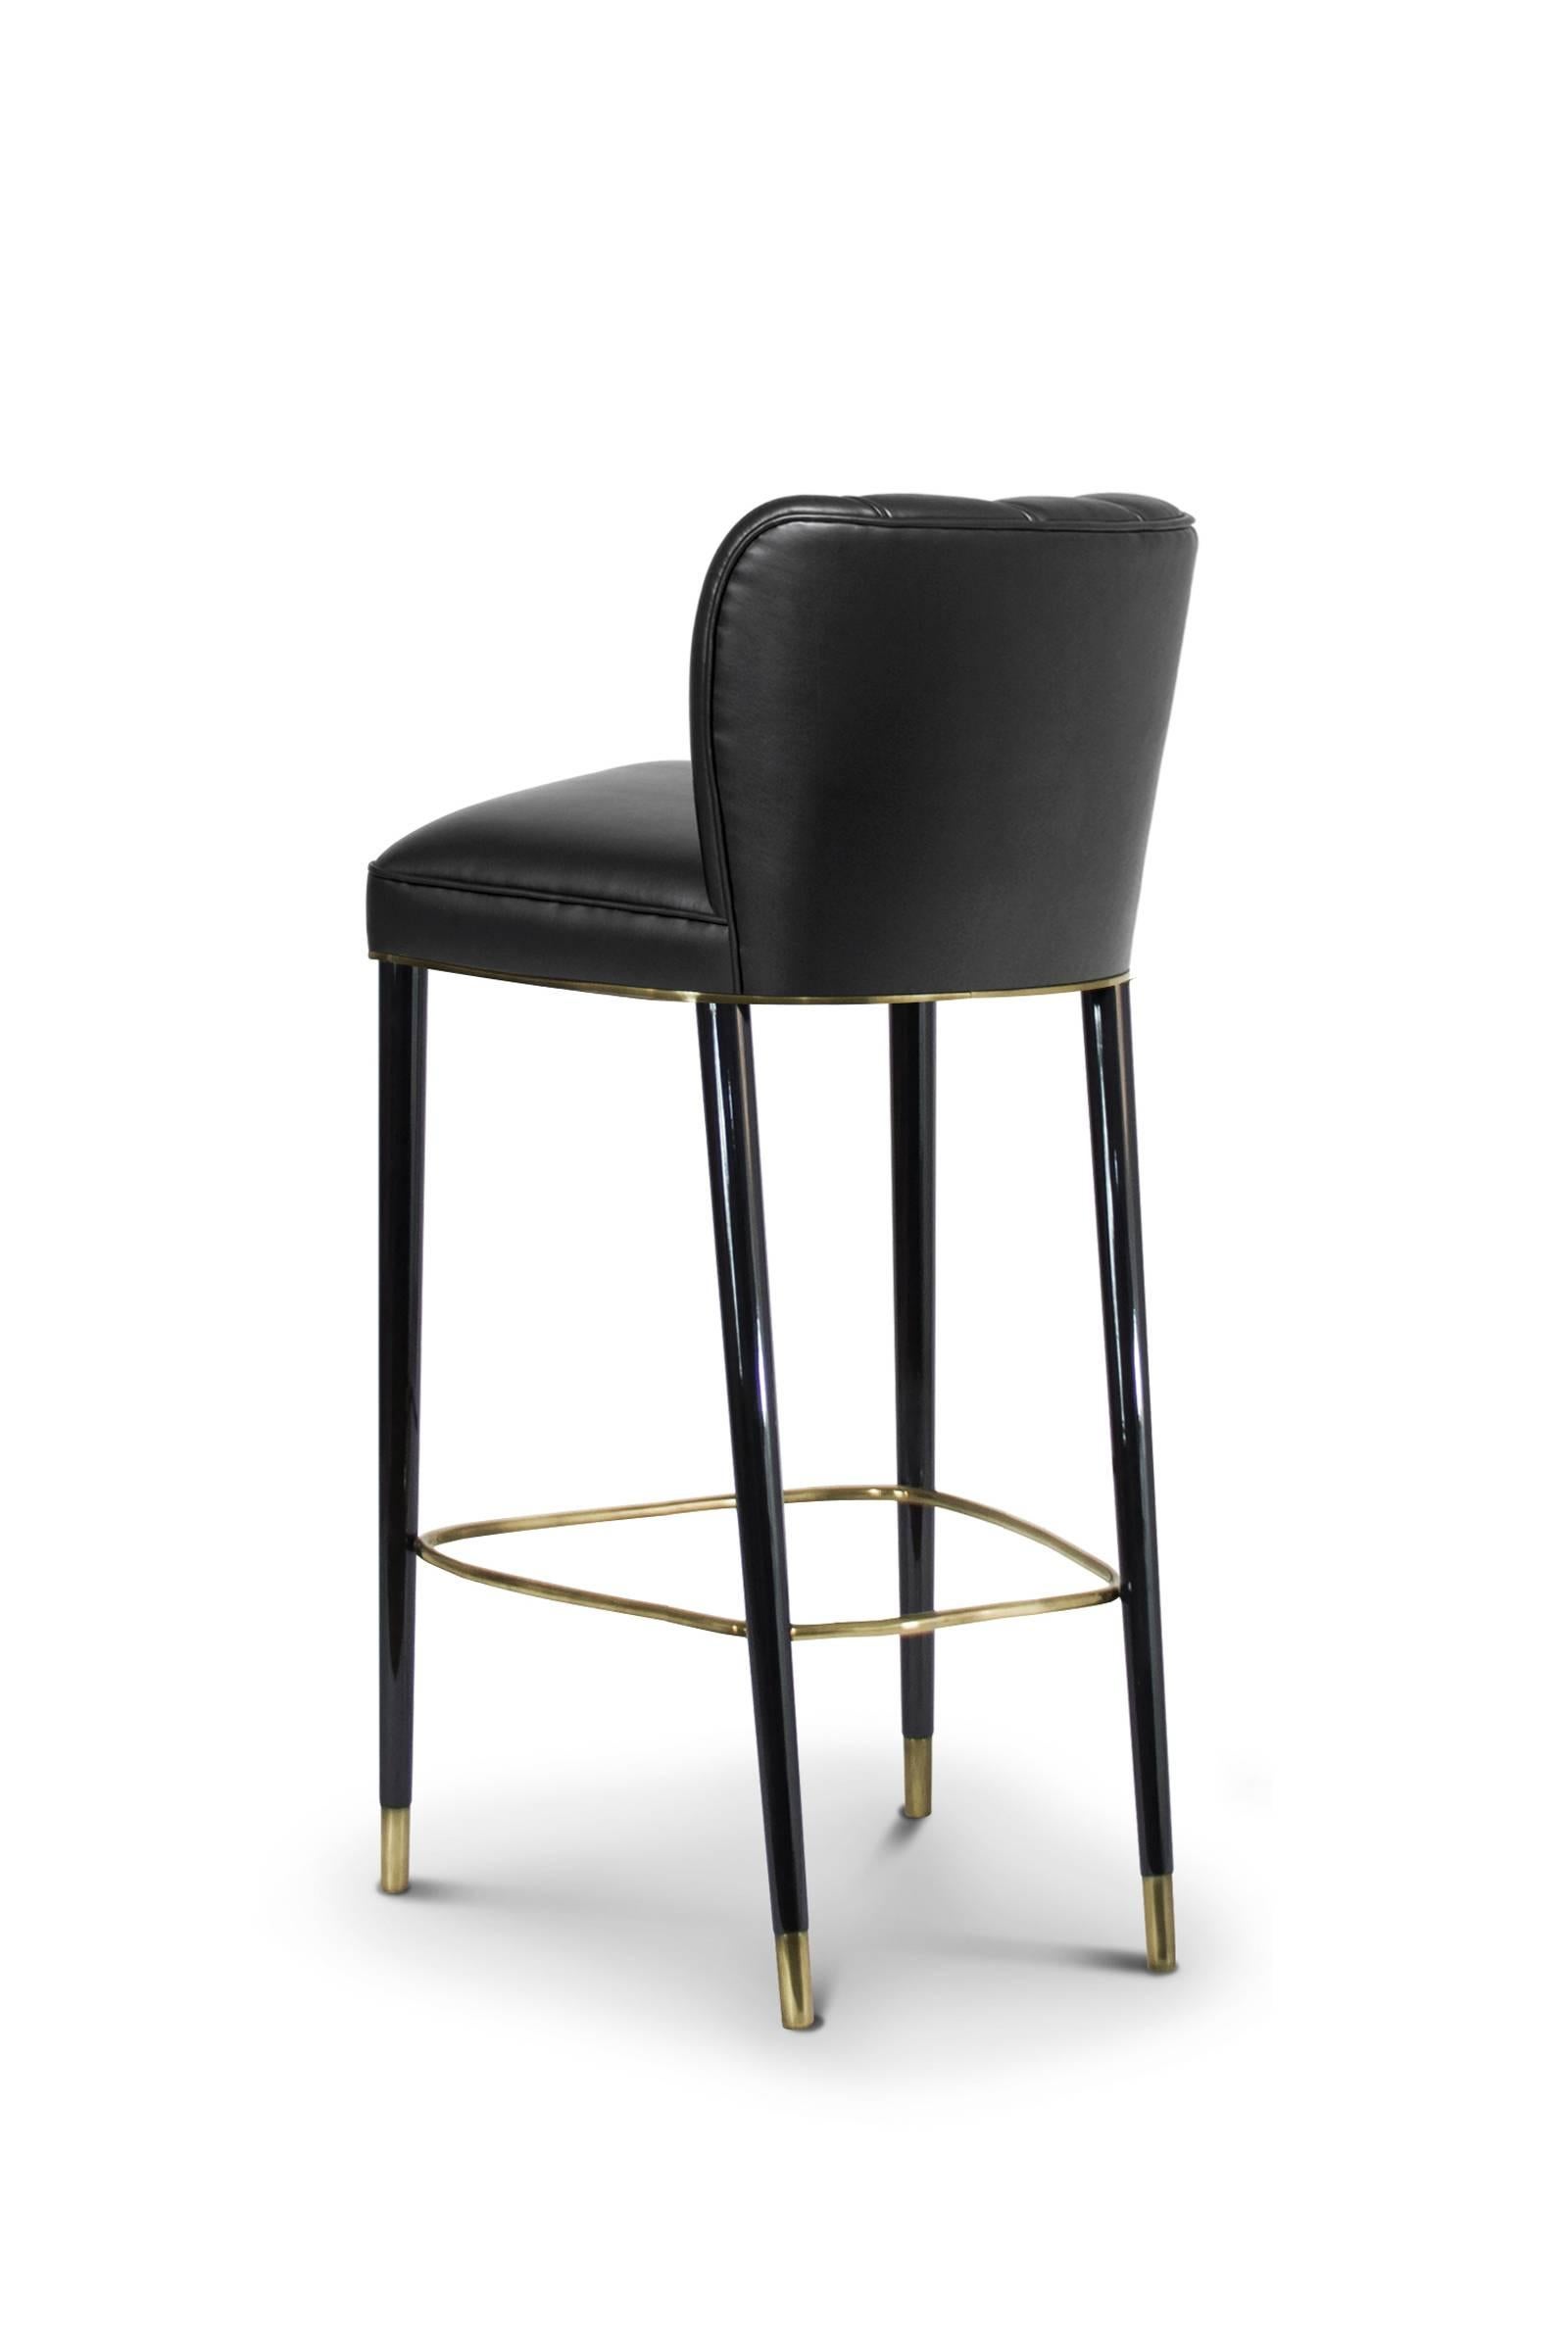 black and brass bar stools